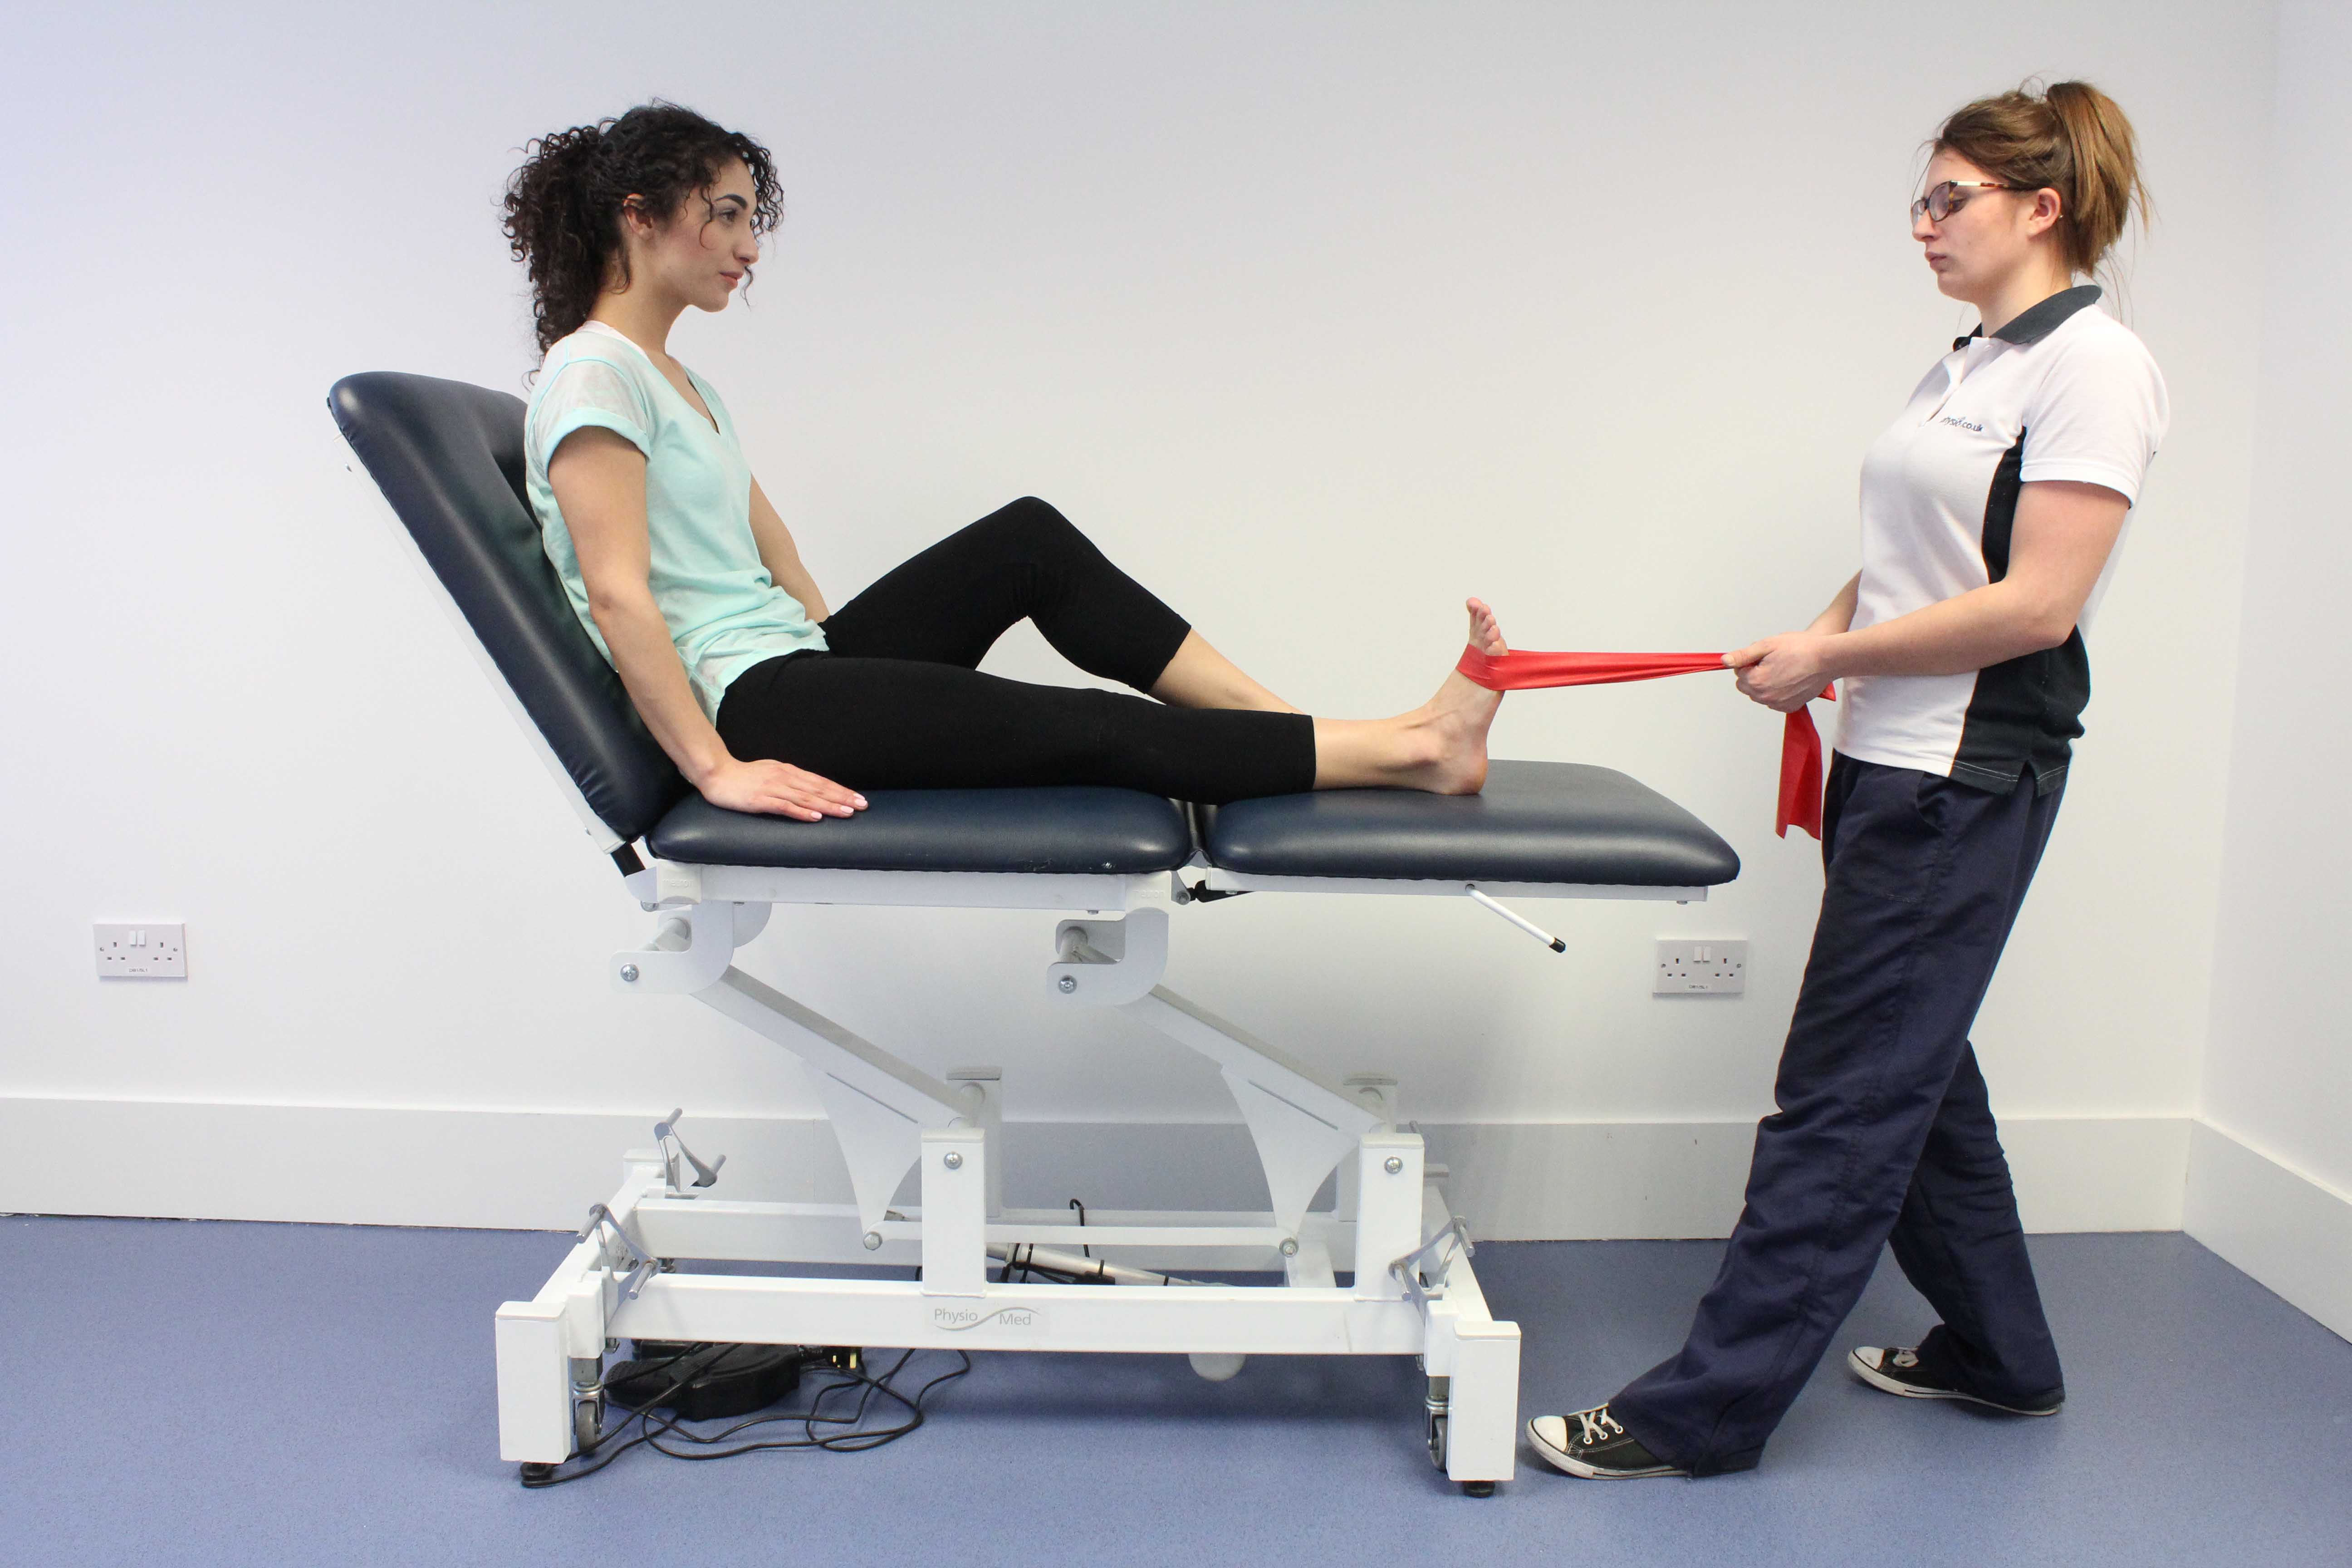 All About Calf Strains — Suzie Foreman Physiotherapy